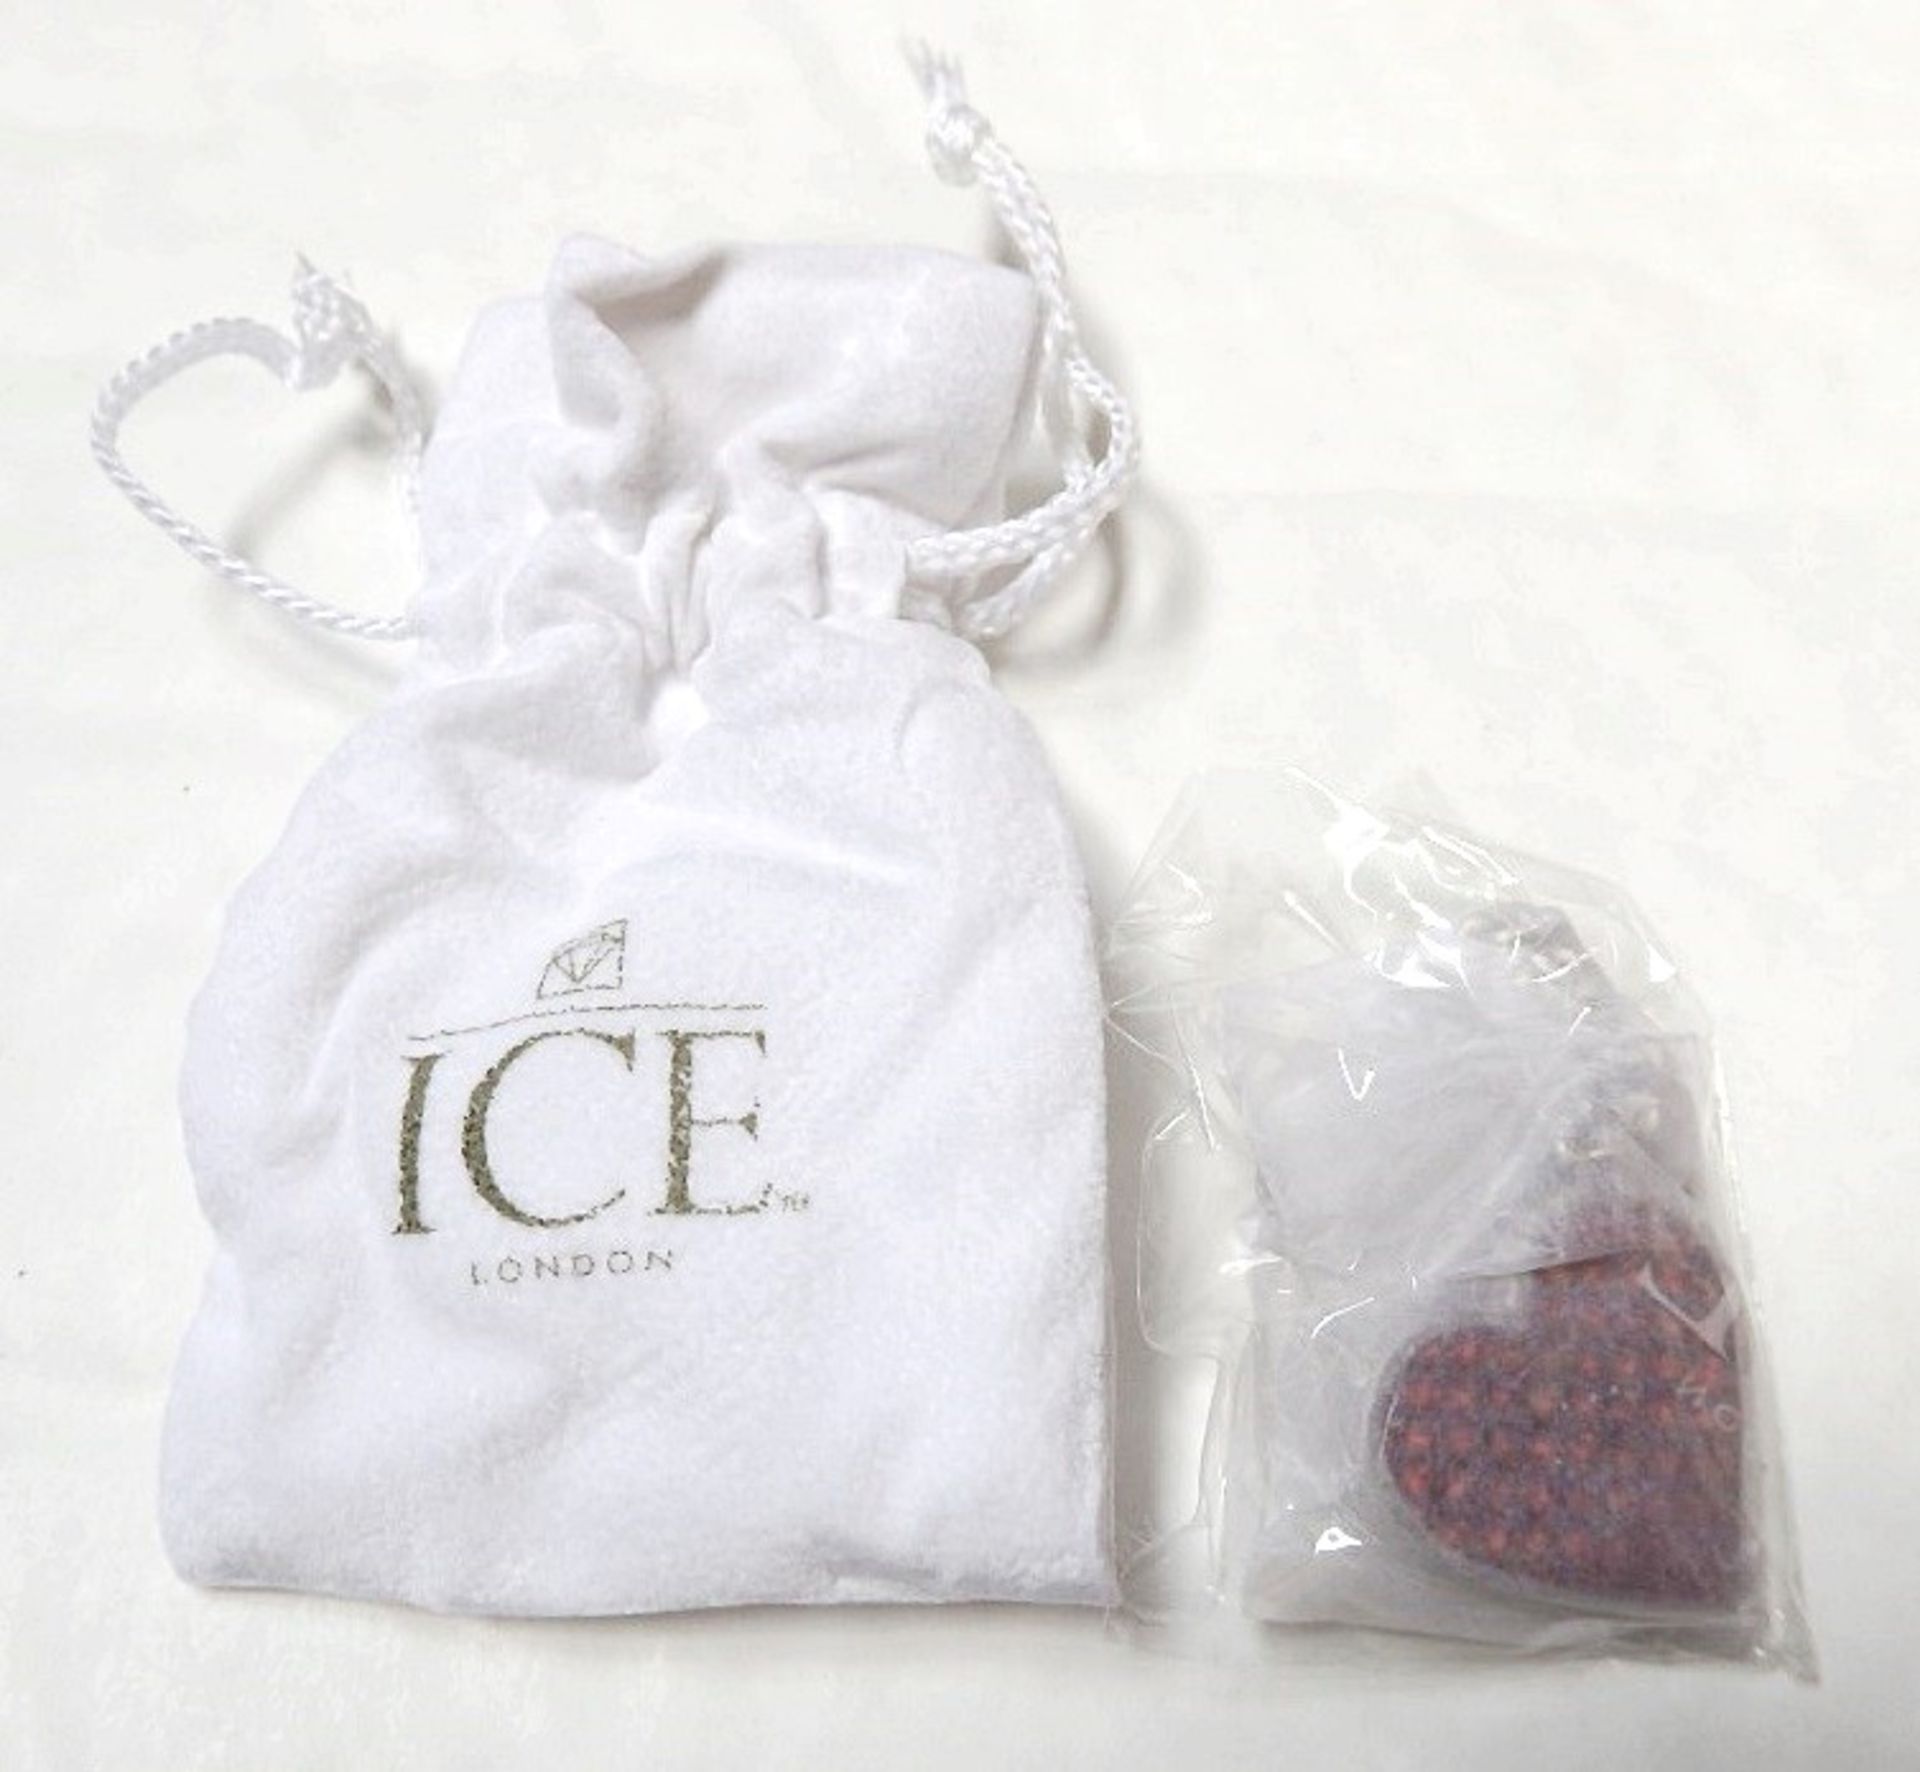 10 x Sterling Silver Plated Red Heart Key Rings with ICE London Crystals - Brand New & Sealed - Image 4 of 4